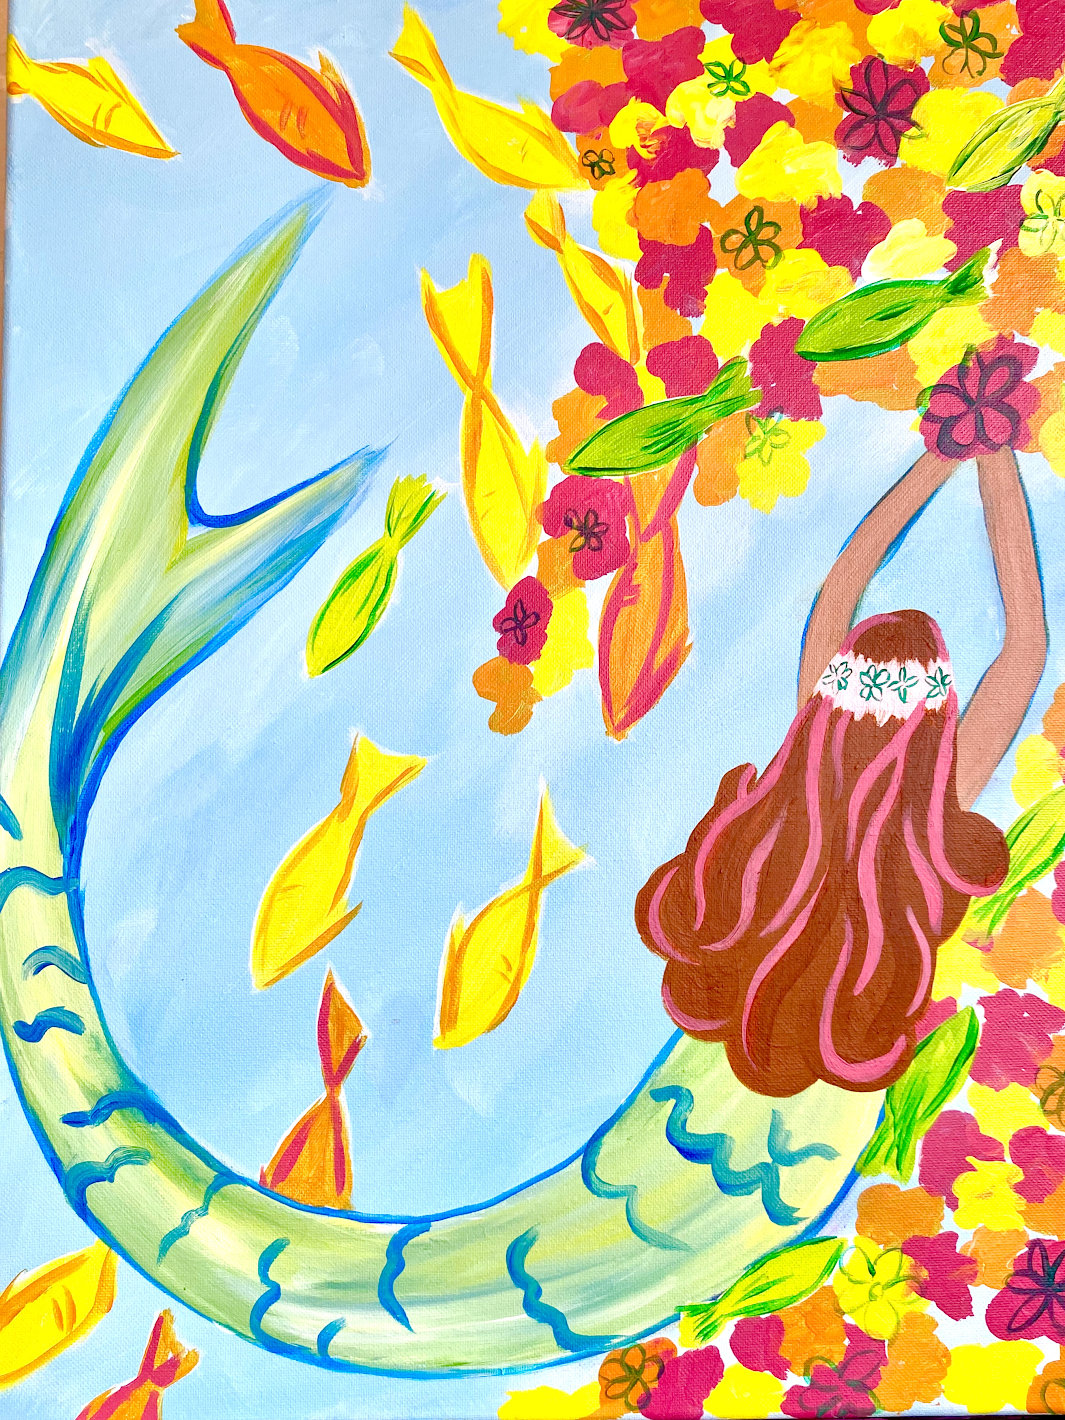 Come Swim With Me from uptown paint and sip perfect for girls night out ideas and a cute date night Jupiter FL